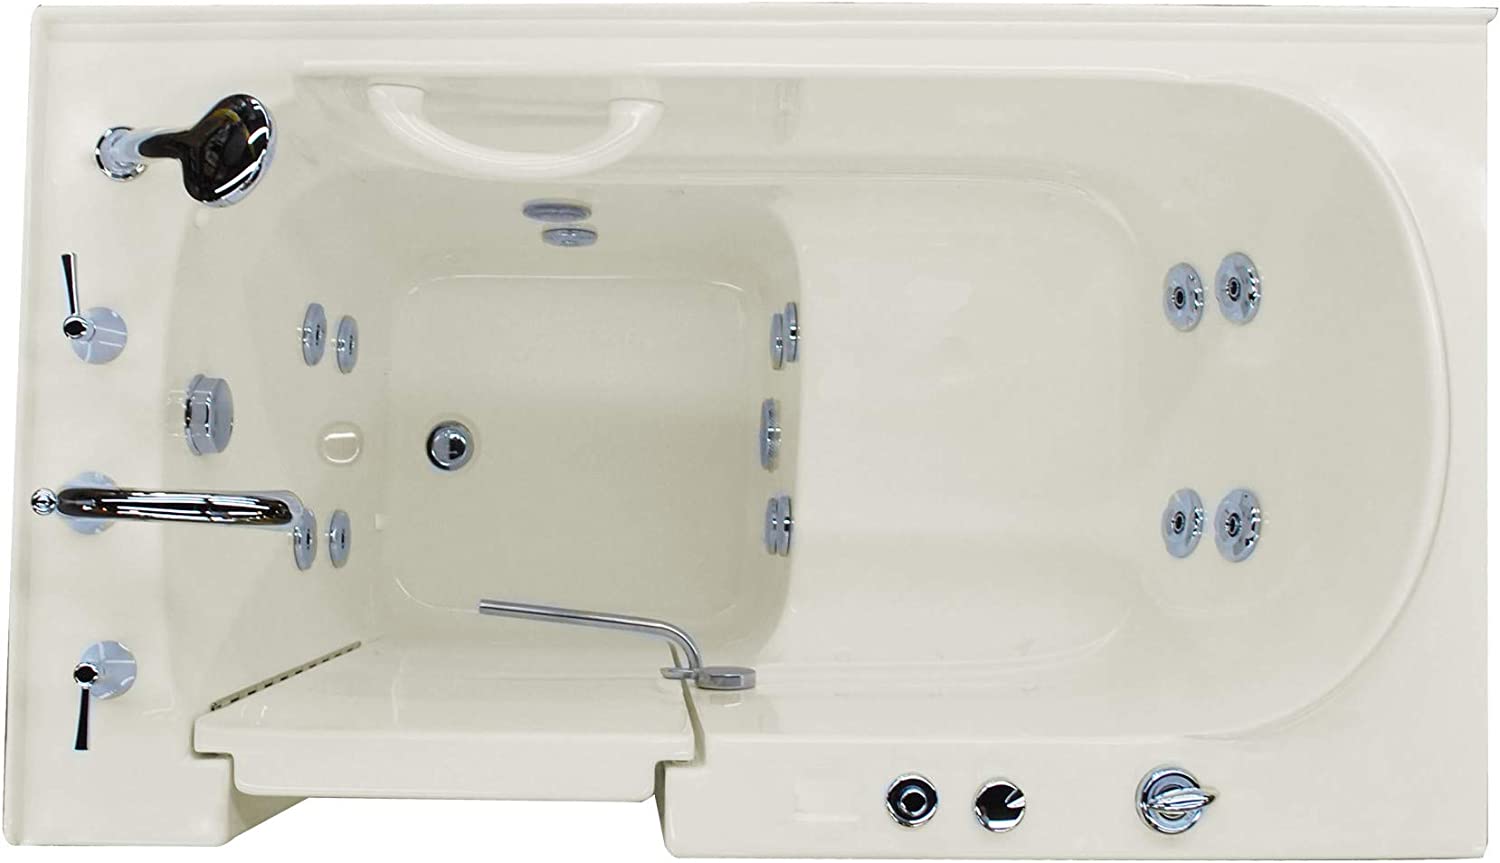 Meditub top view showing drain and other features such as jets, door handle, faucet, and hand shower